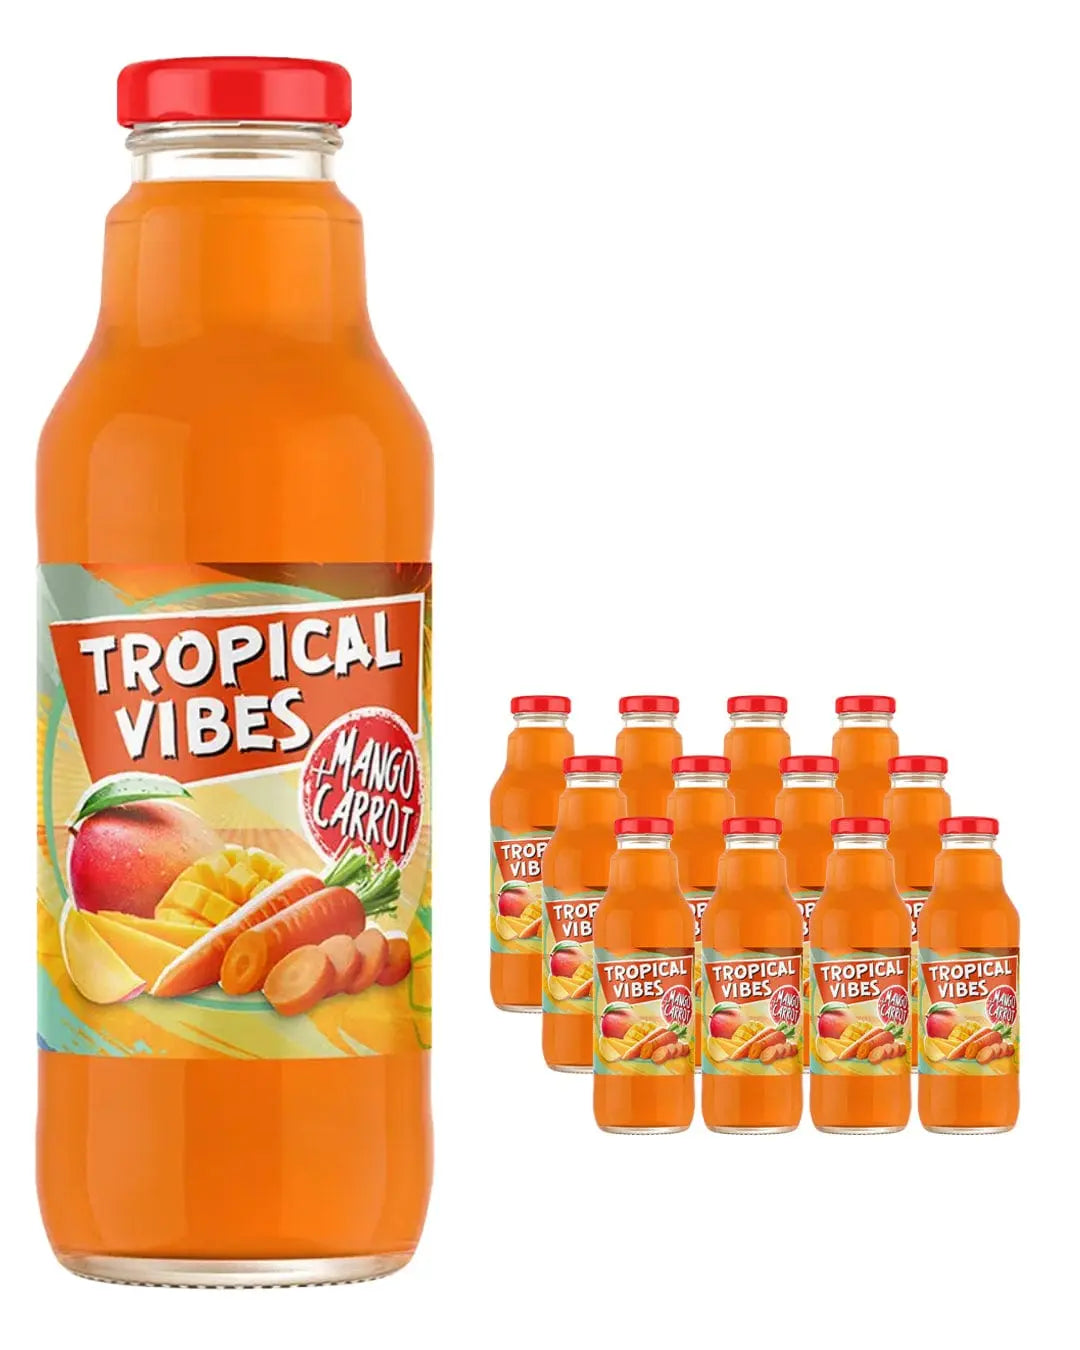 Tropical Vibes Mango Carrot Multipack, 12 x 532 ml Soft Drinks & Mixers